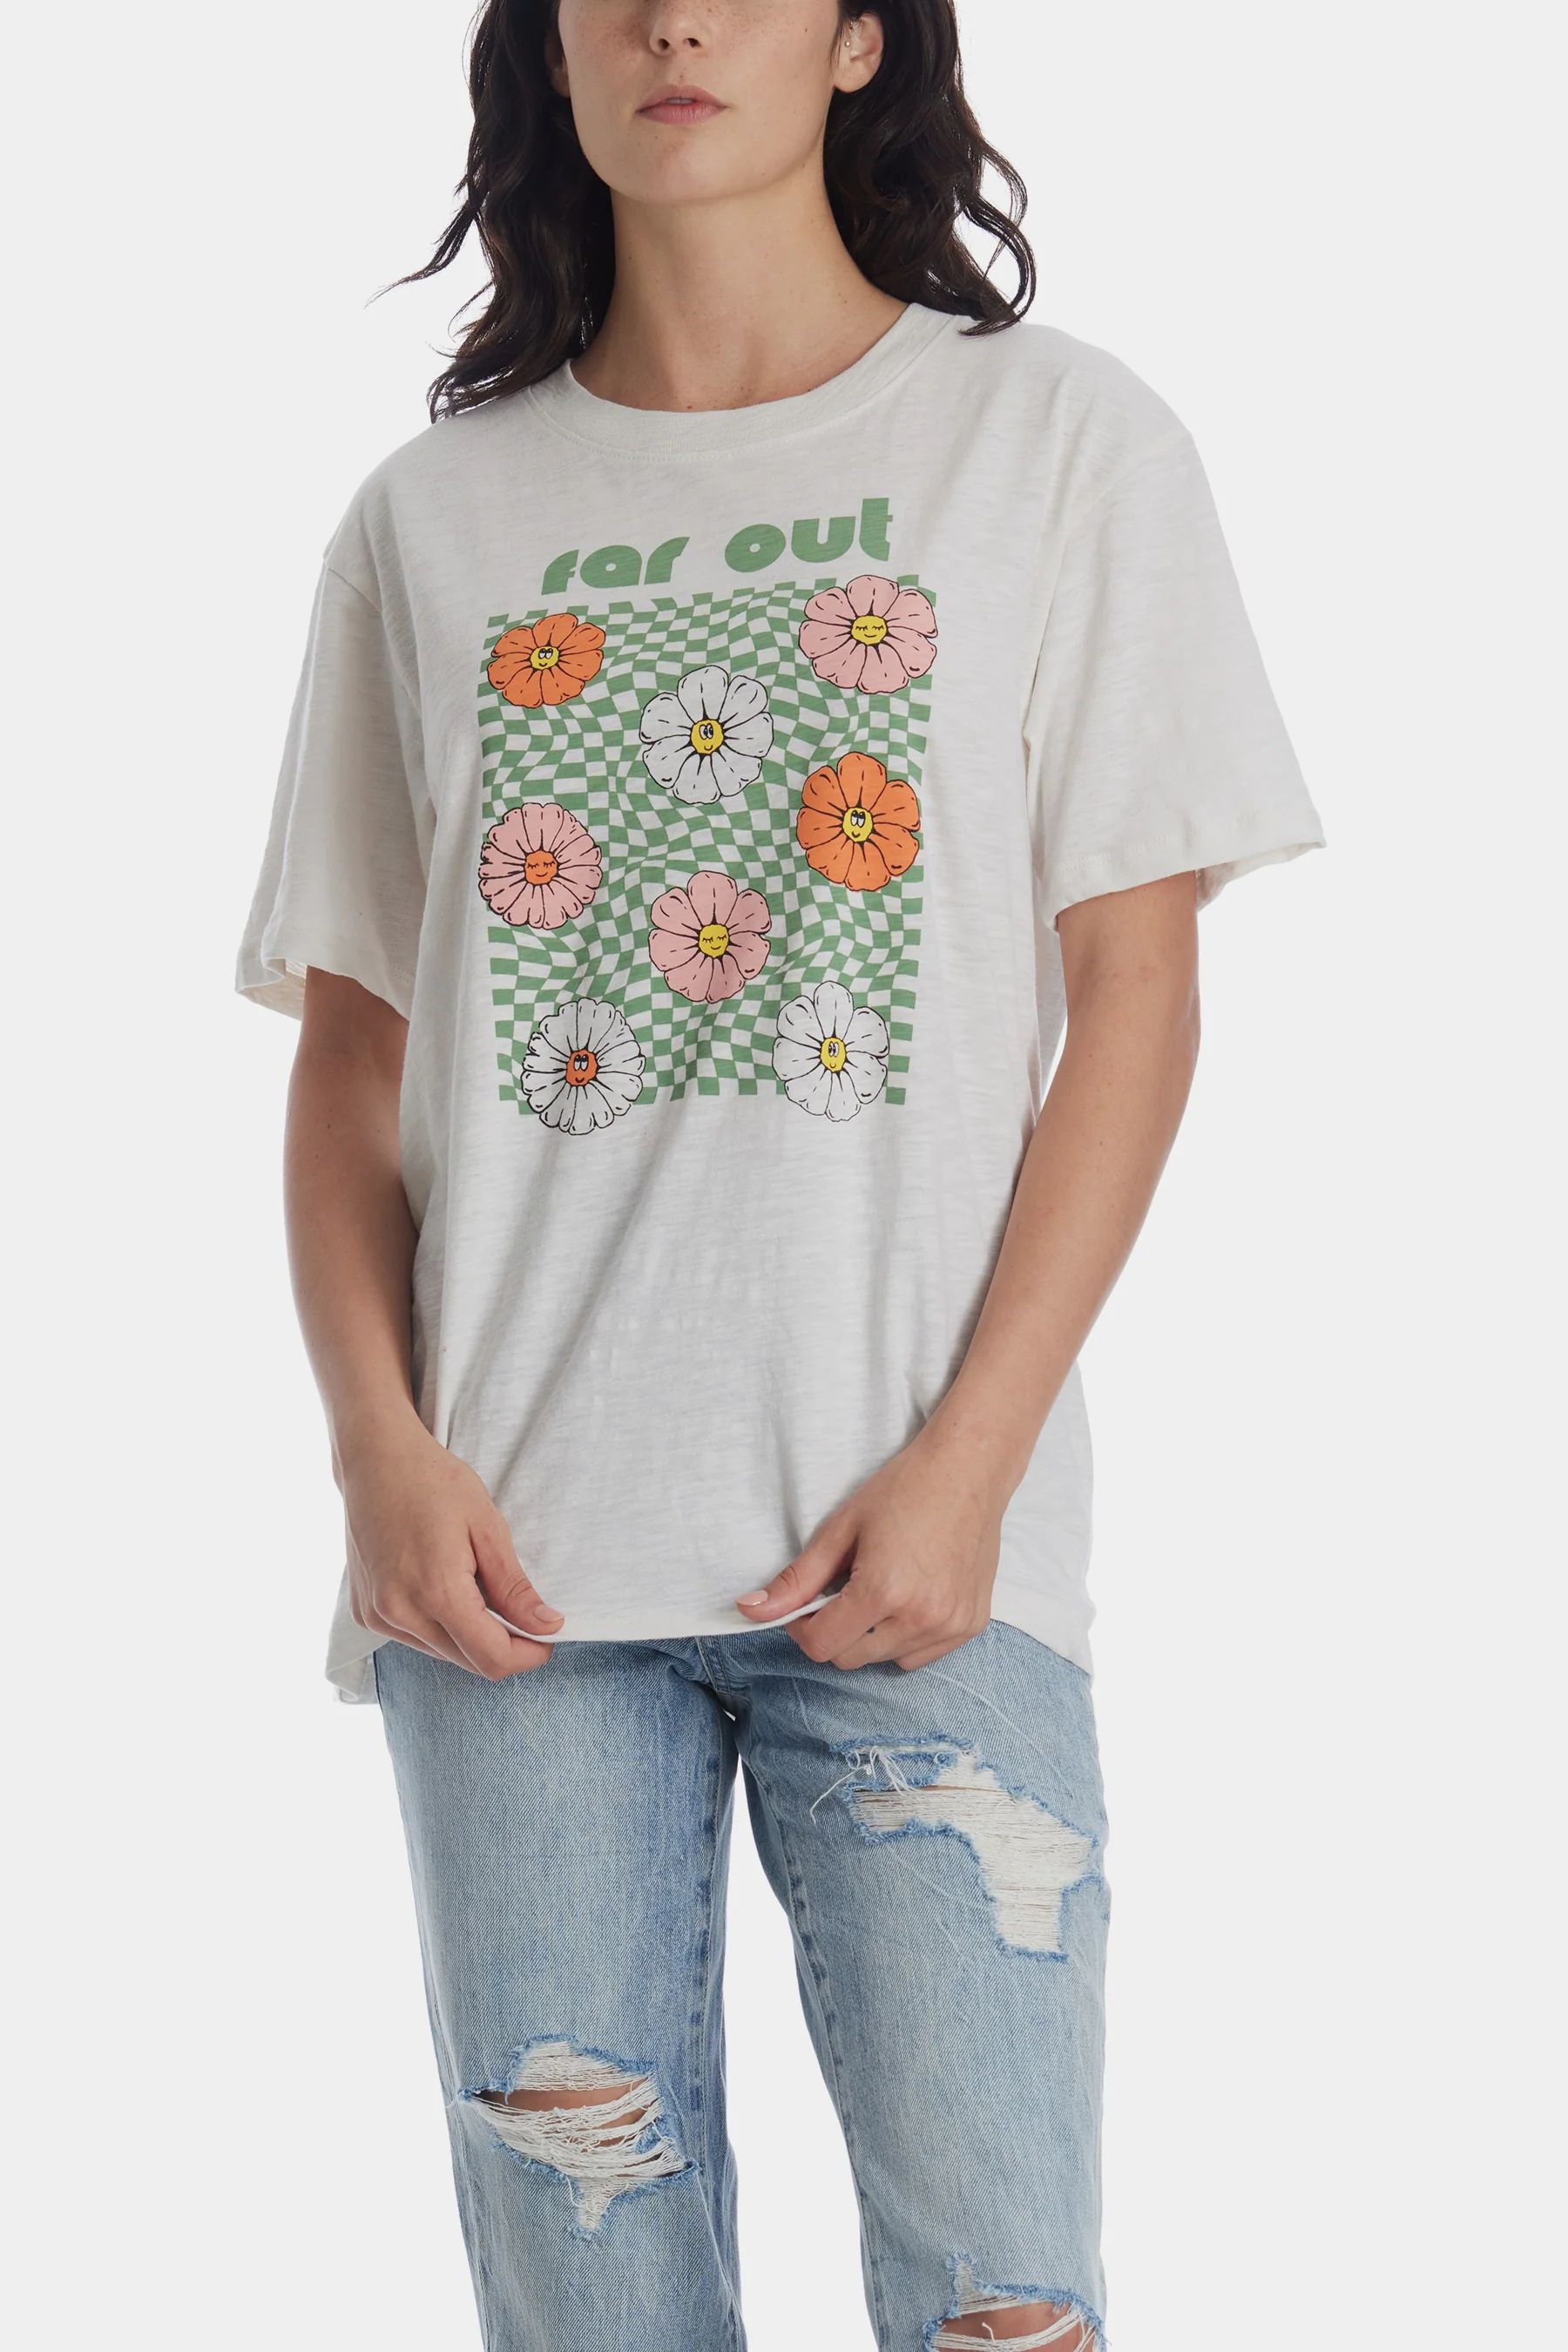 Sub_Urban Riot Women's Farout Boyfriend Tee in White Small Lord & Taylor | Lord & Taylor